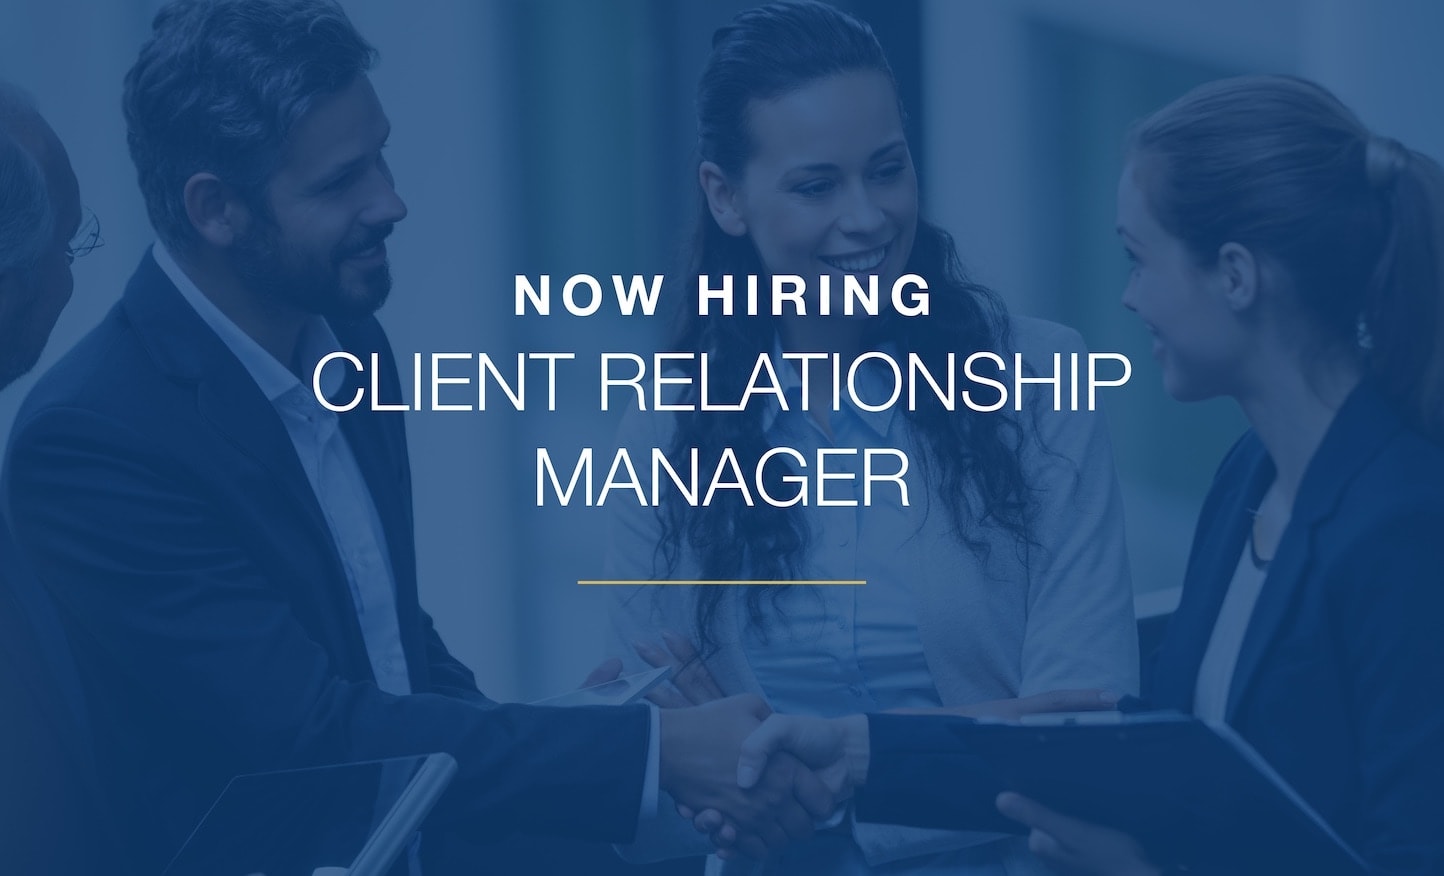 Client Relationship Manager hiring title image.